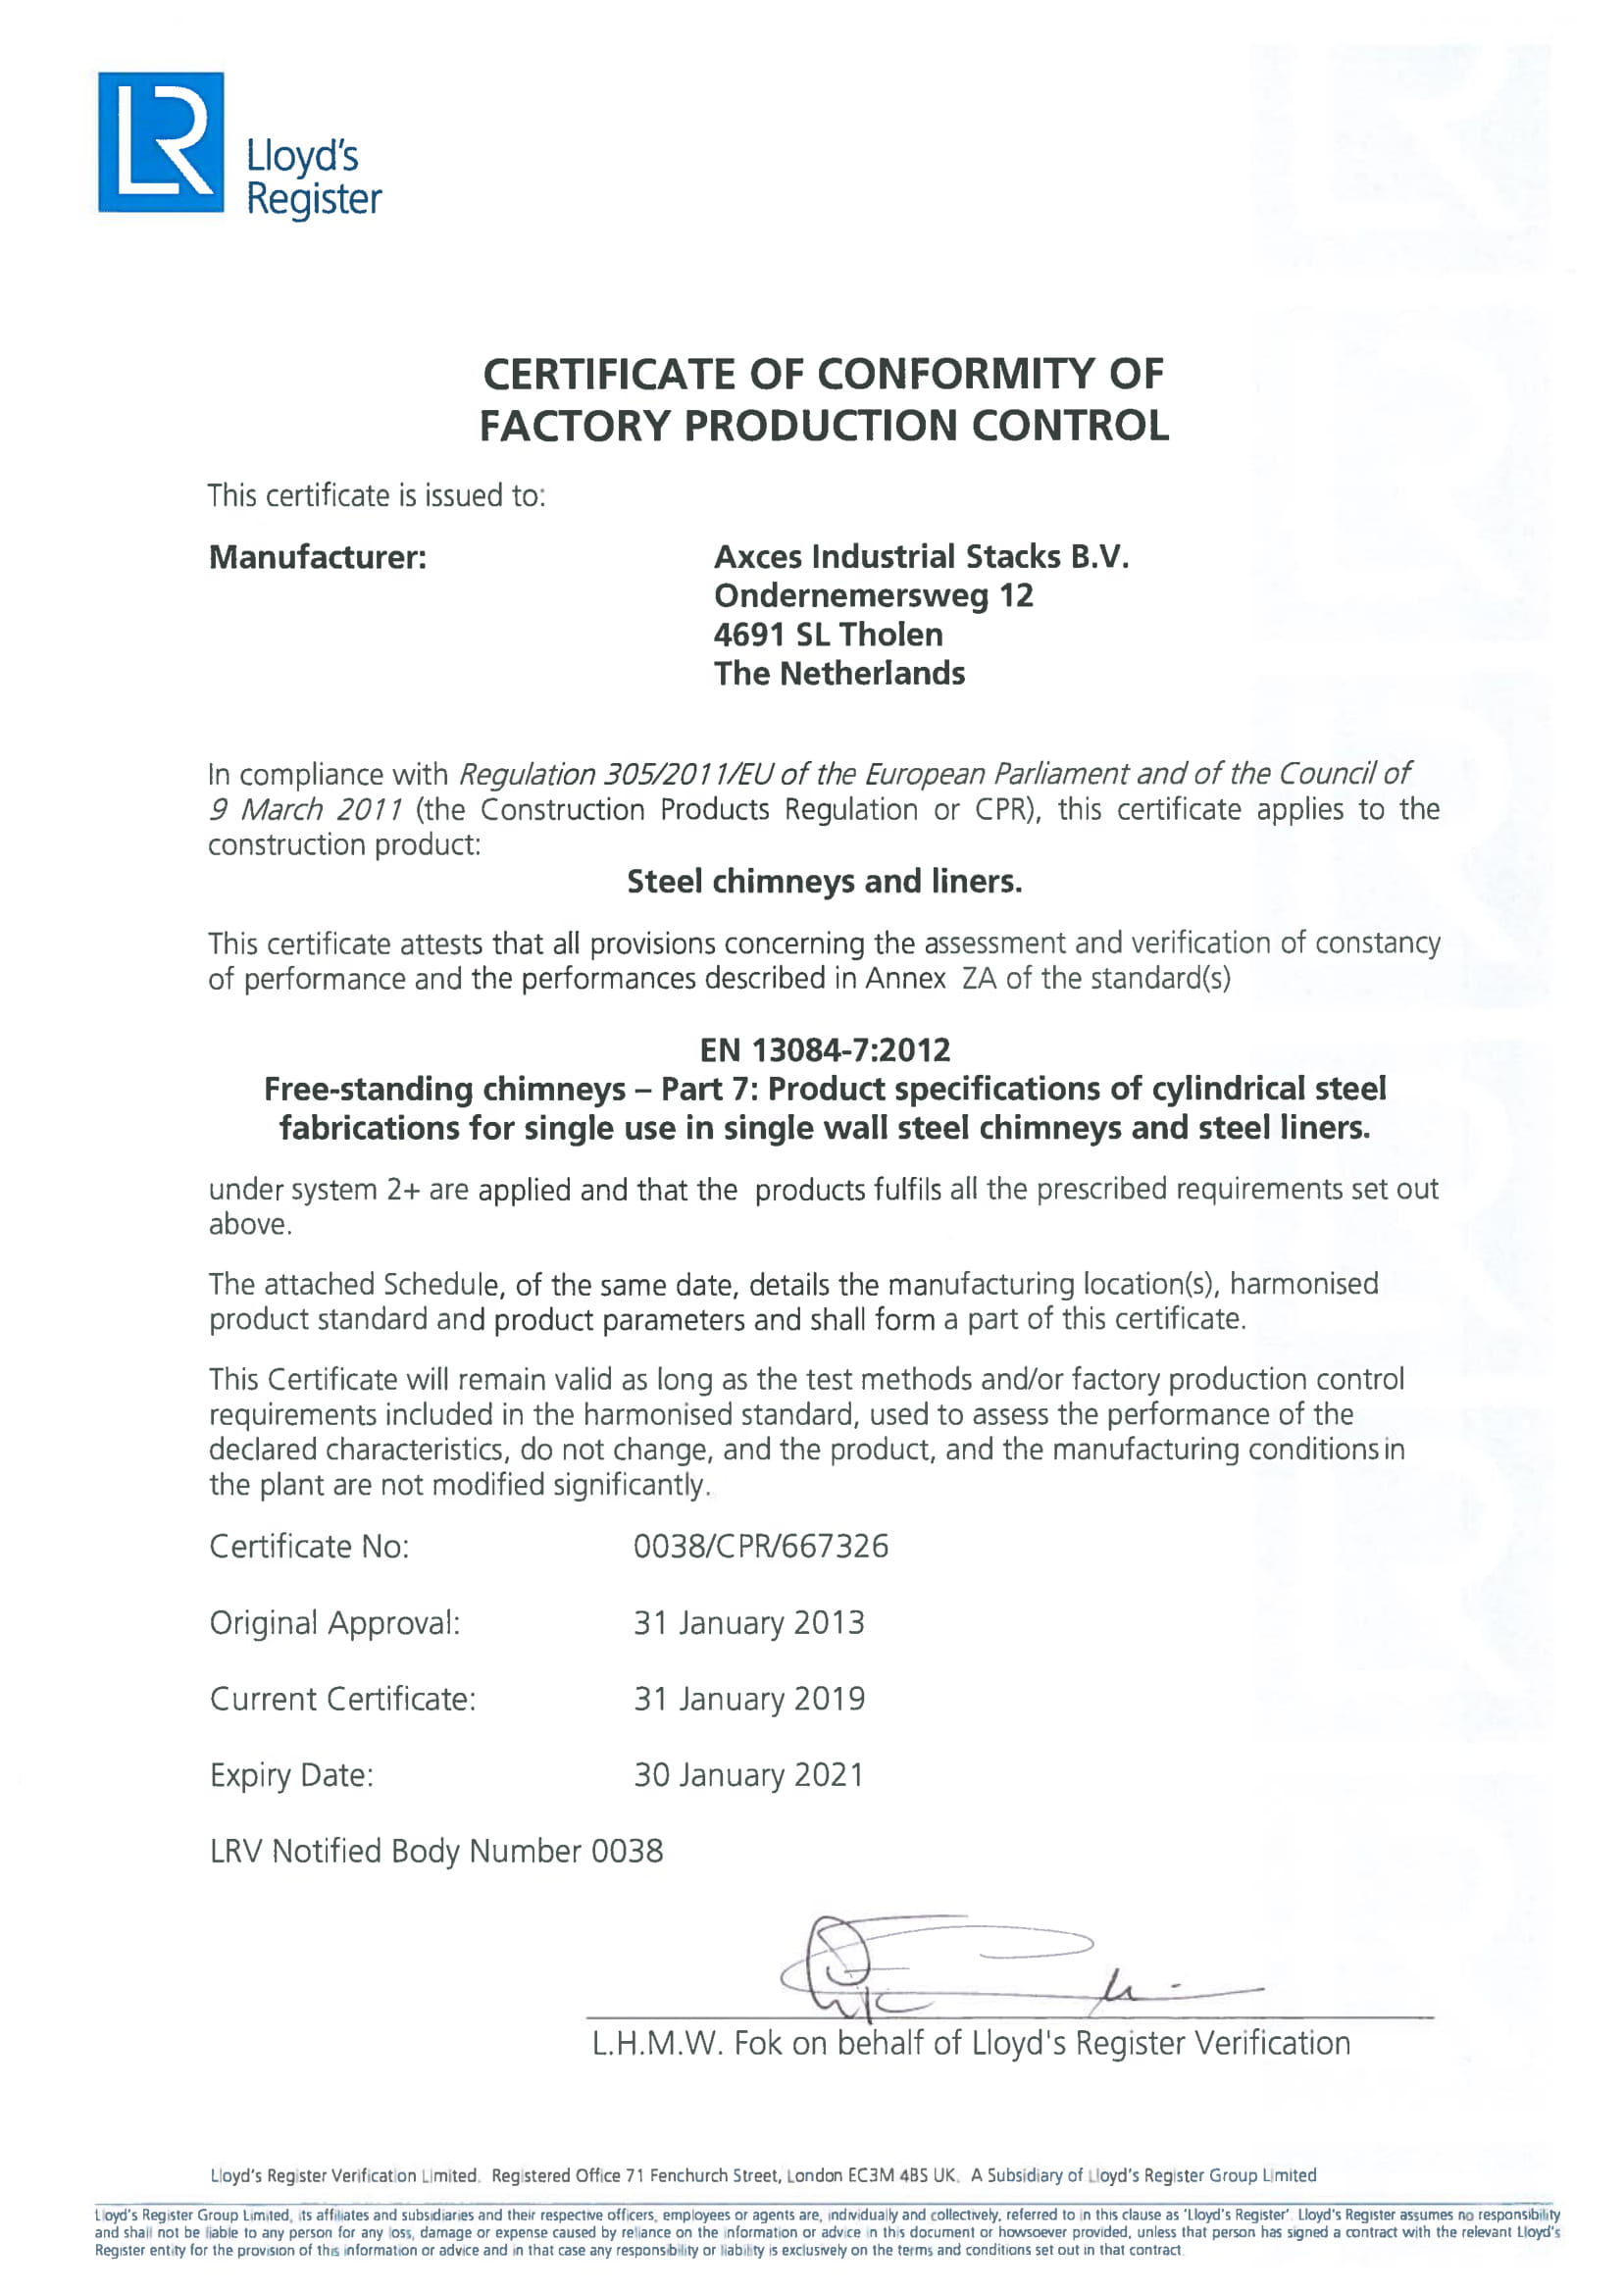 Certificate of Conformity of Factory Production Control